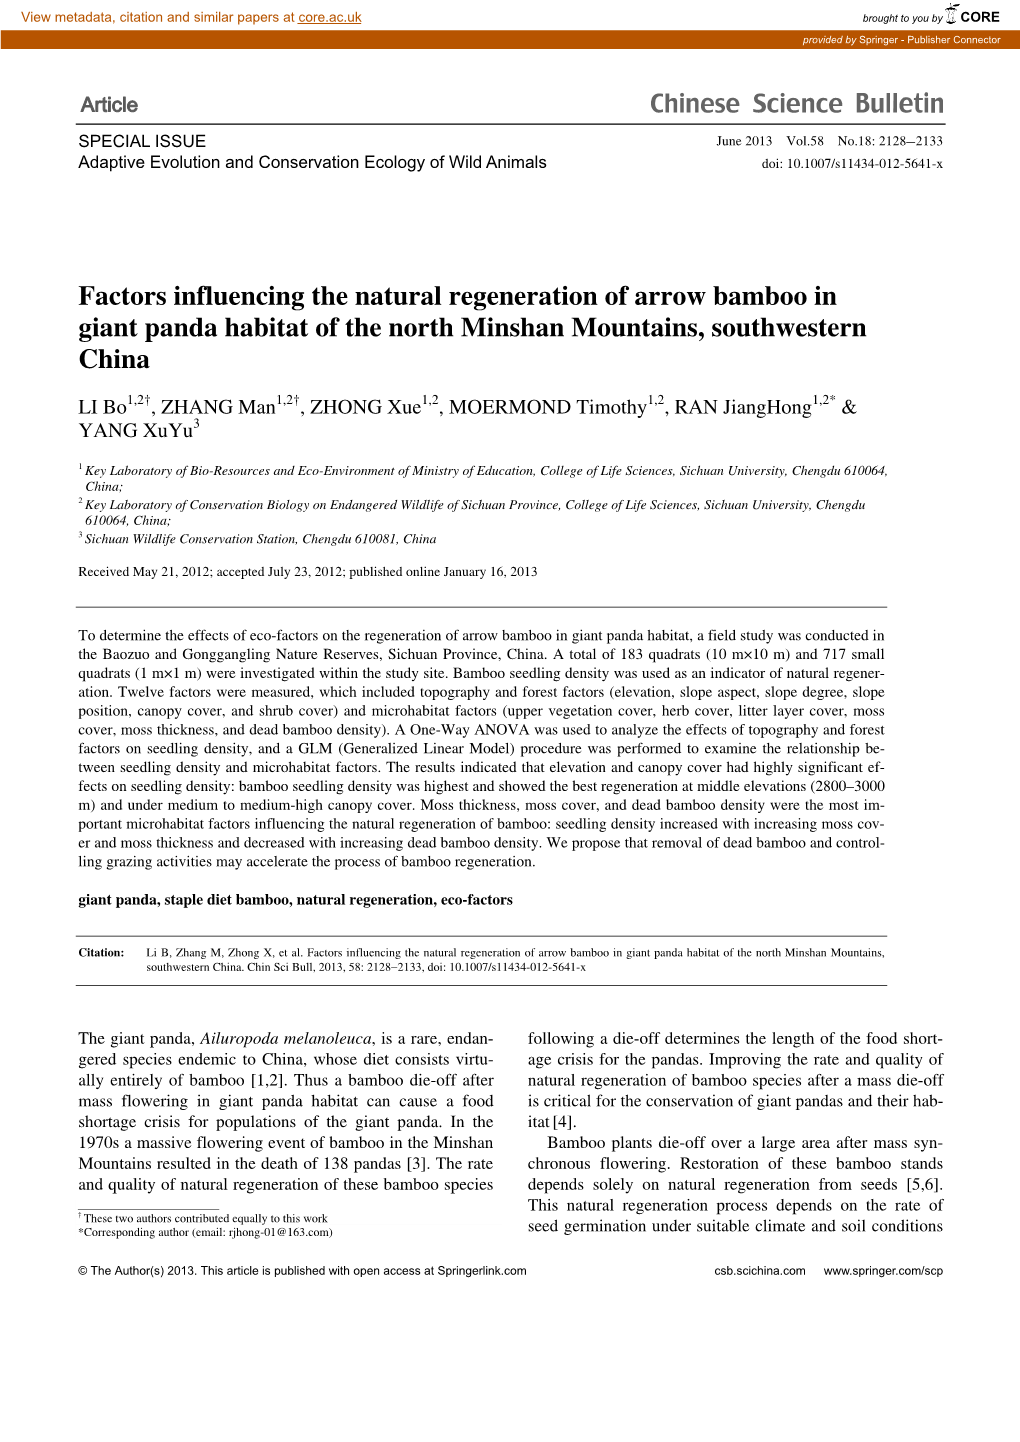 Factors Influencing the Natural Regeneration of Arrow Bamboo in Giant Panda Habitat of the North Minshan Mountains, Southwestern China